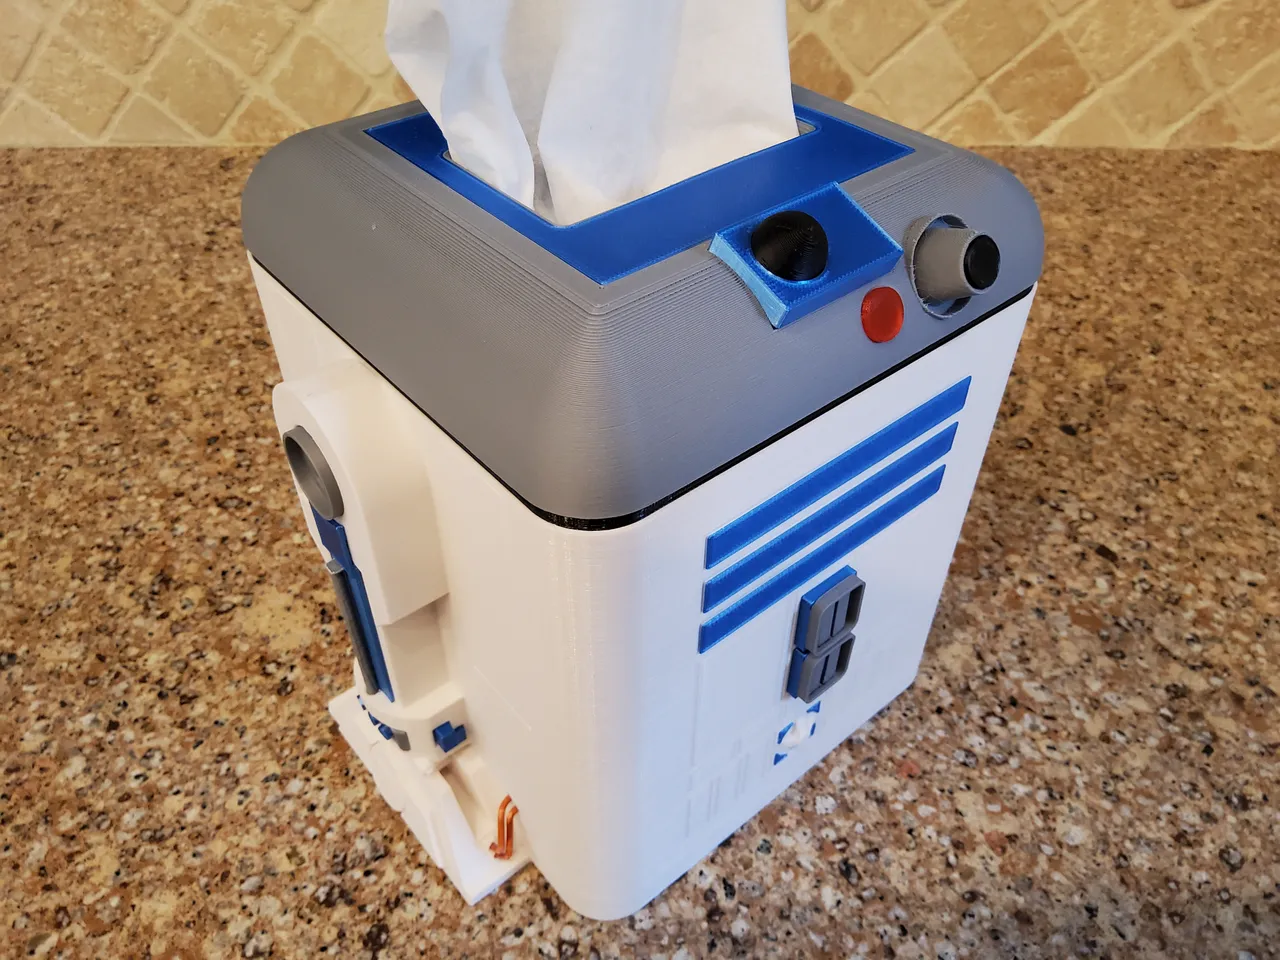 R2D2 Paper craft (using an empty toilet paper roll!) - Love, Jaime